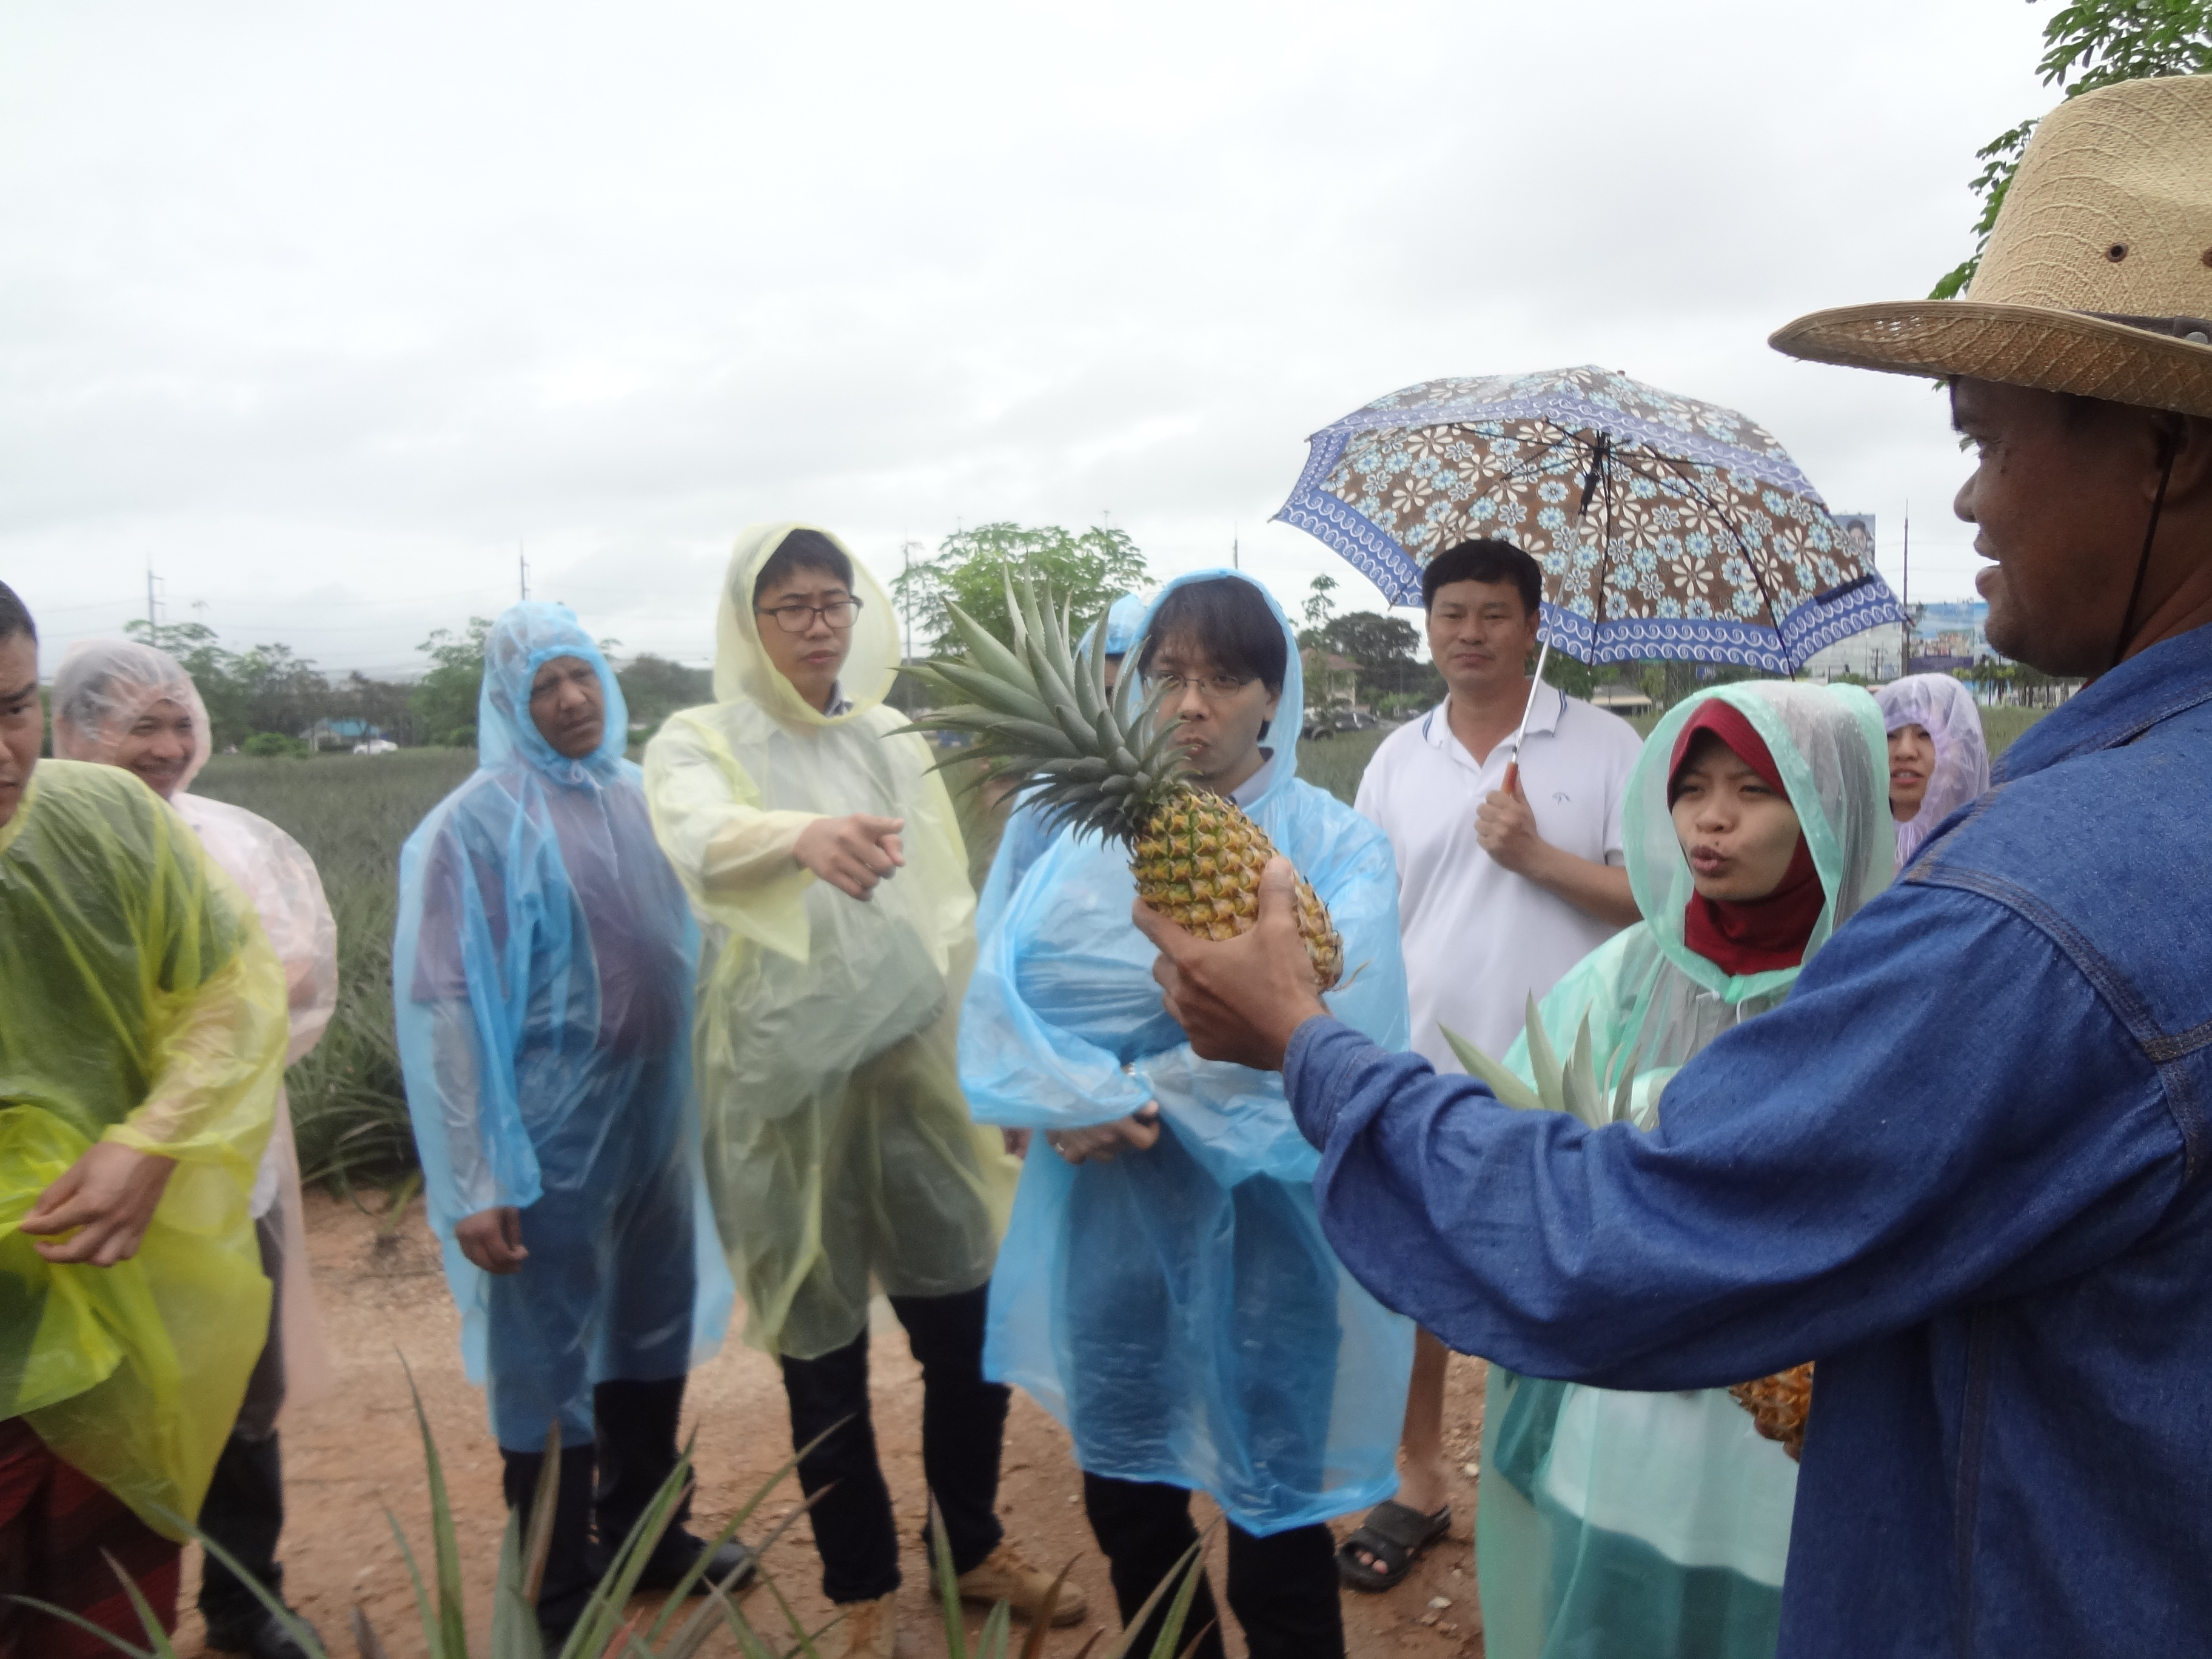 Participants listening to an explanation at the Pineapple Farm